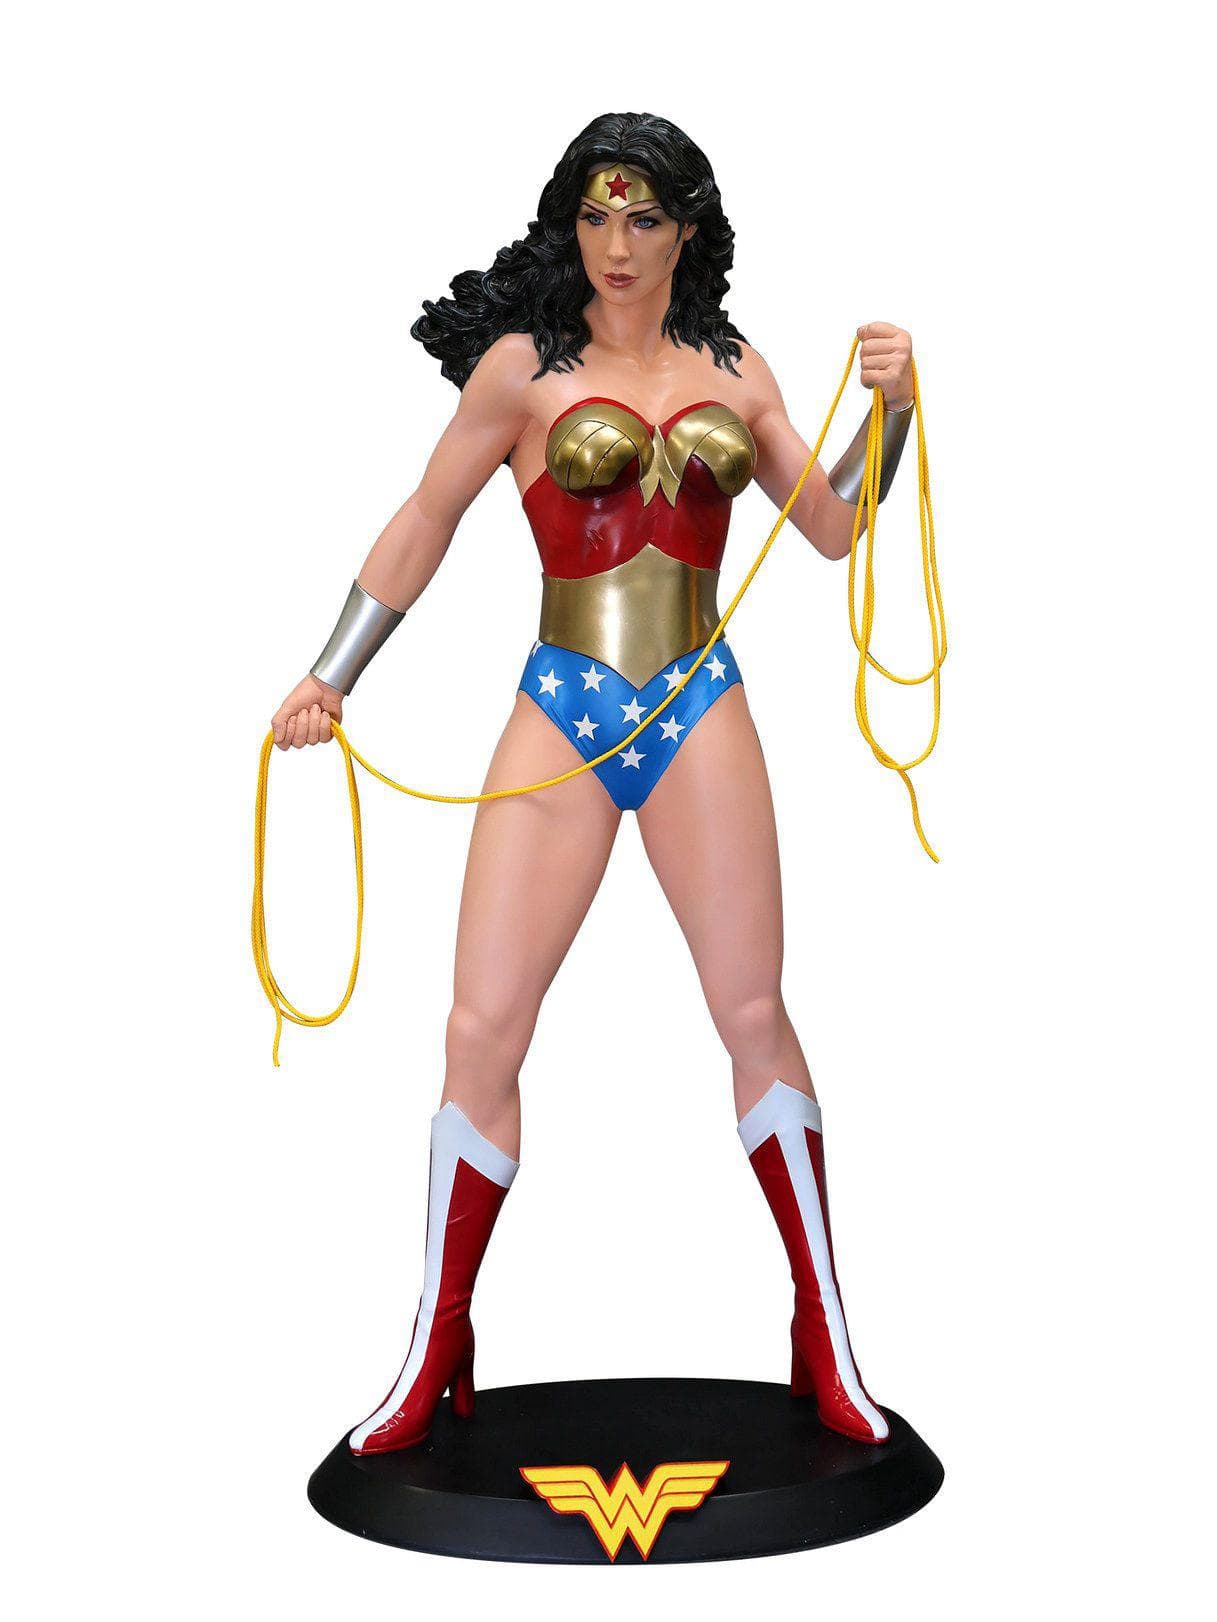 Life-size Wonder Woman Statue - Collectible - costumes.com